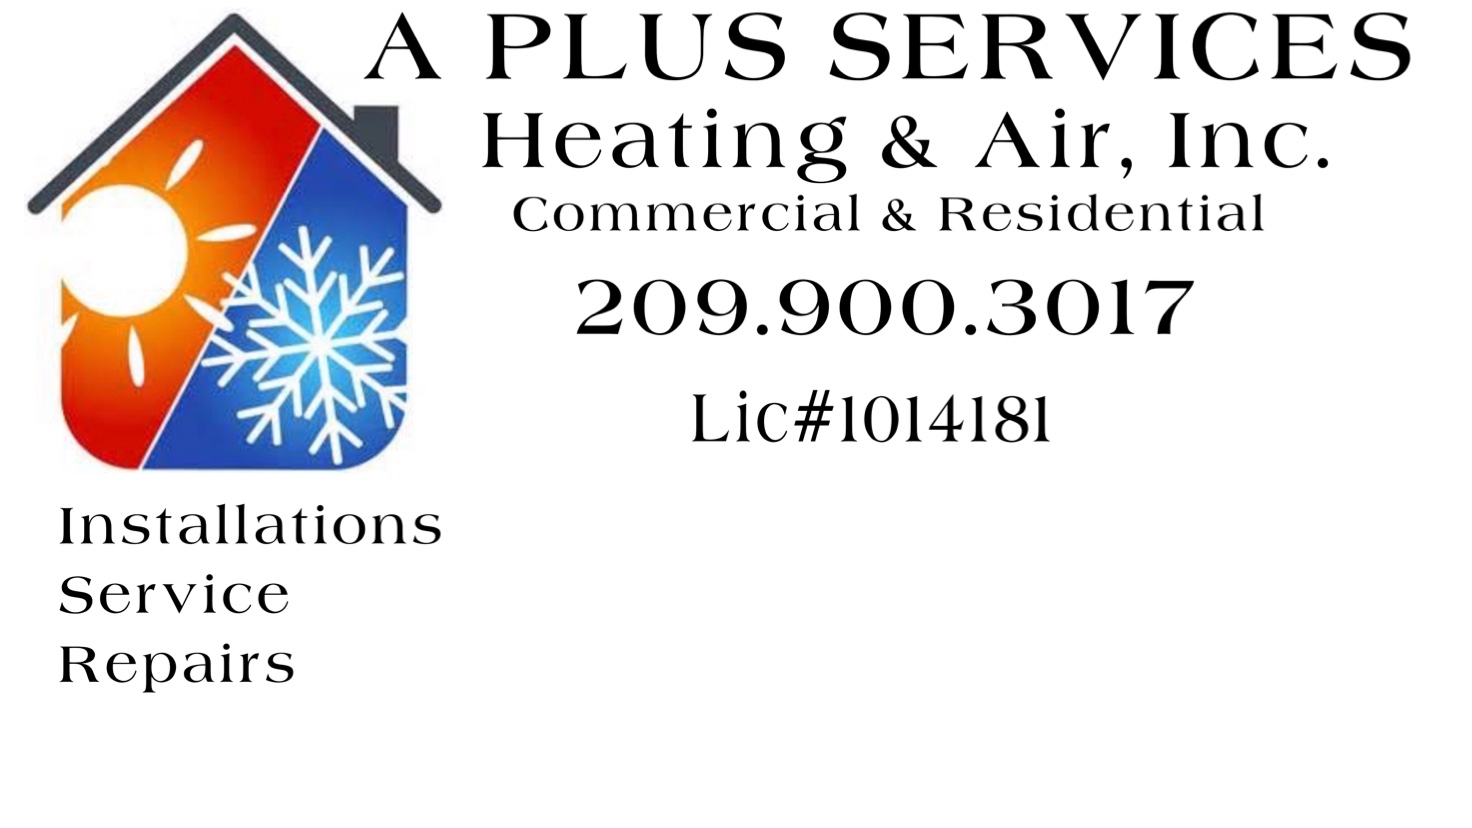 A Plus Services Heating and Air, INC.